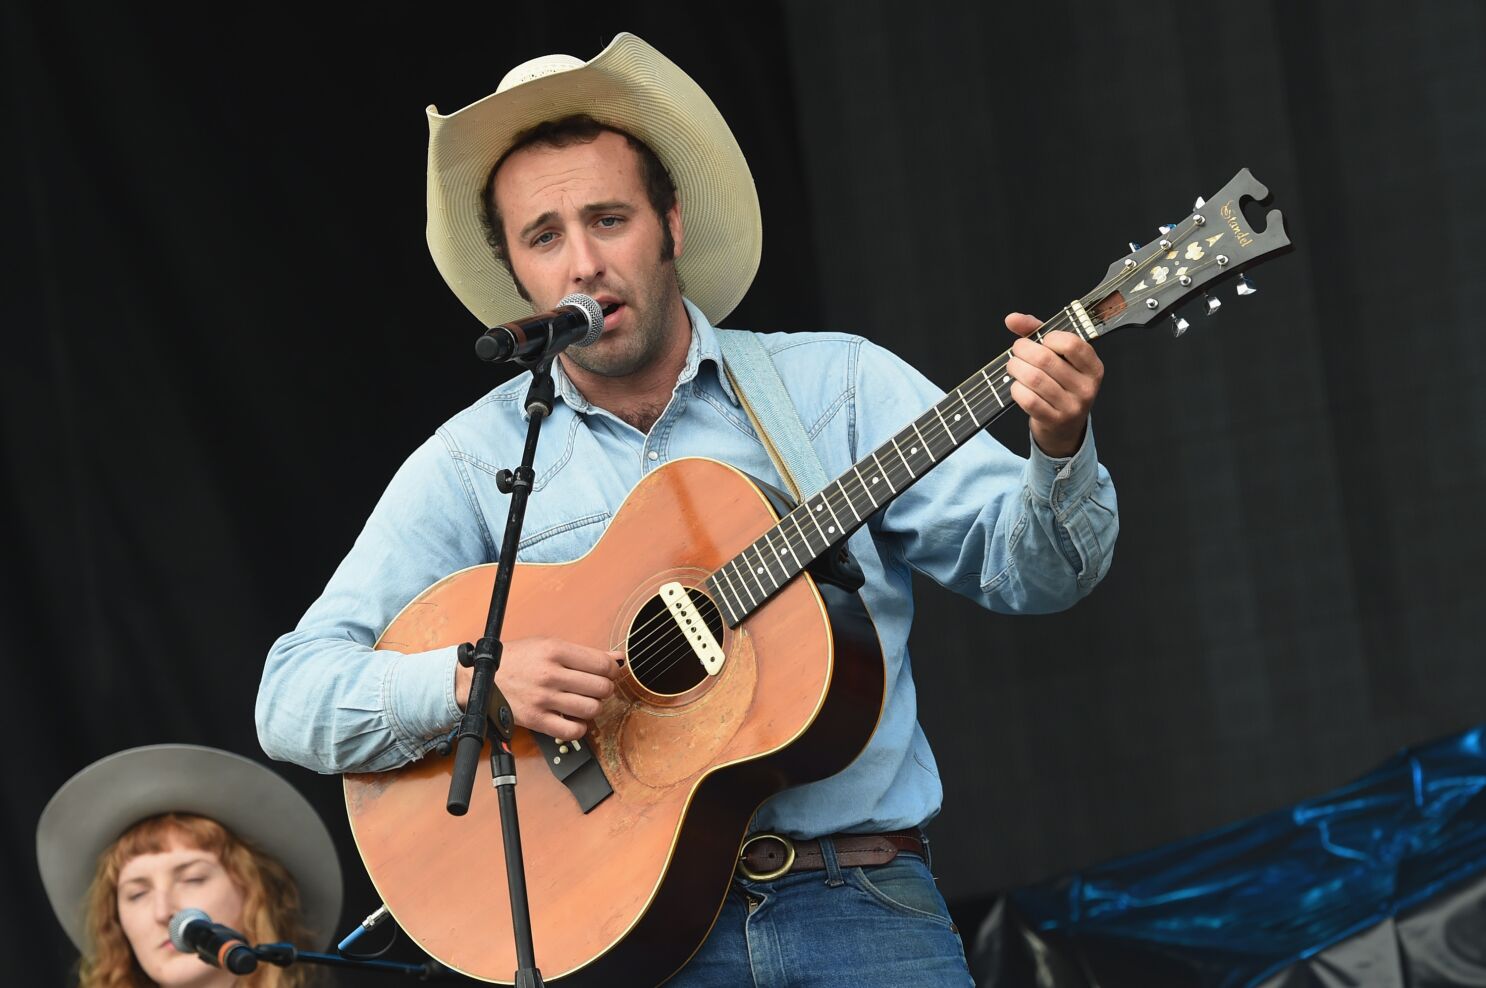 Luke Bell, country singer who went missing, found dead at 32 - Los Angeles Times